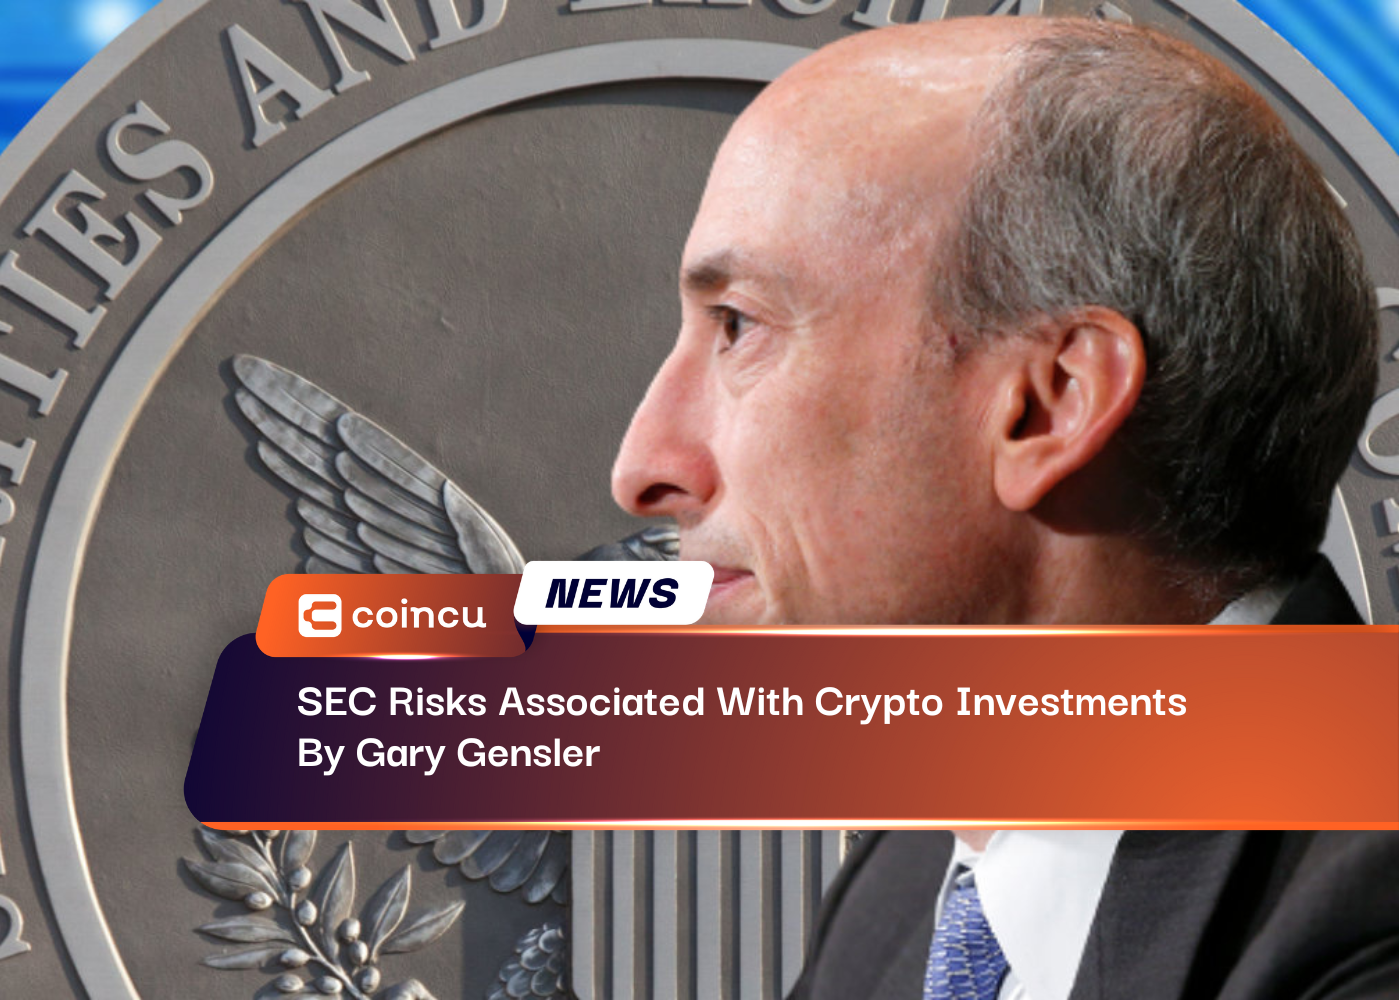 SEC Risks Associated With Crypto Investments